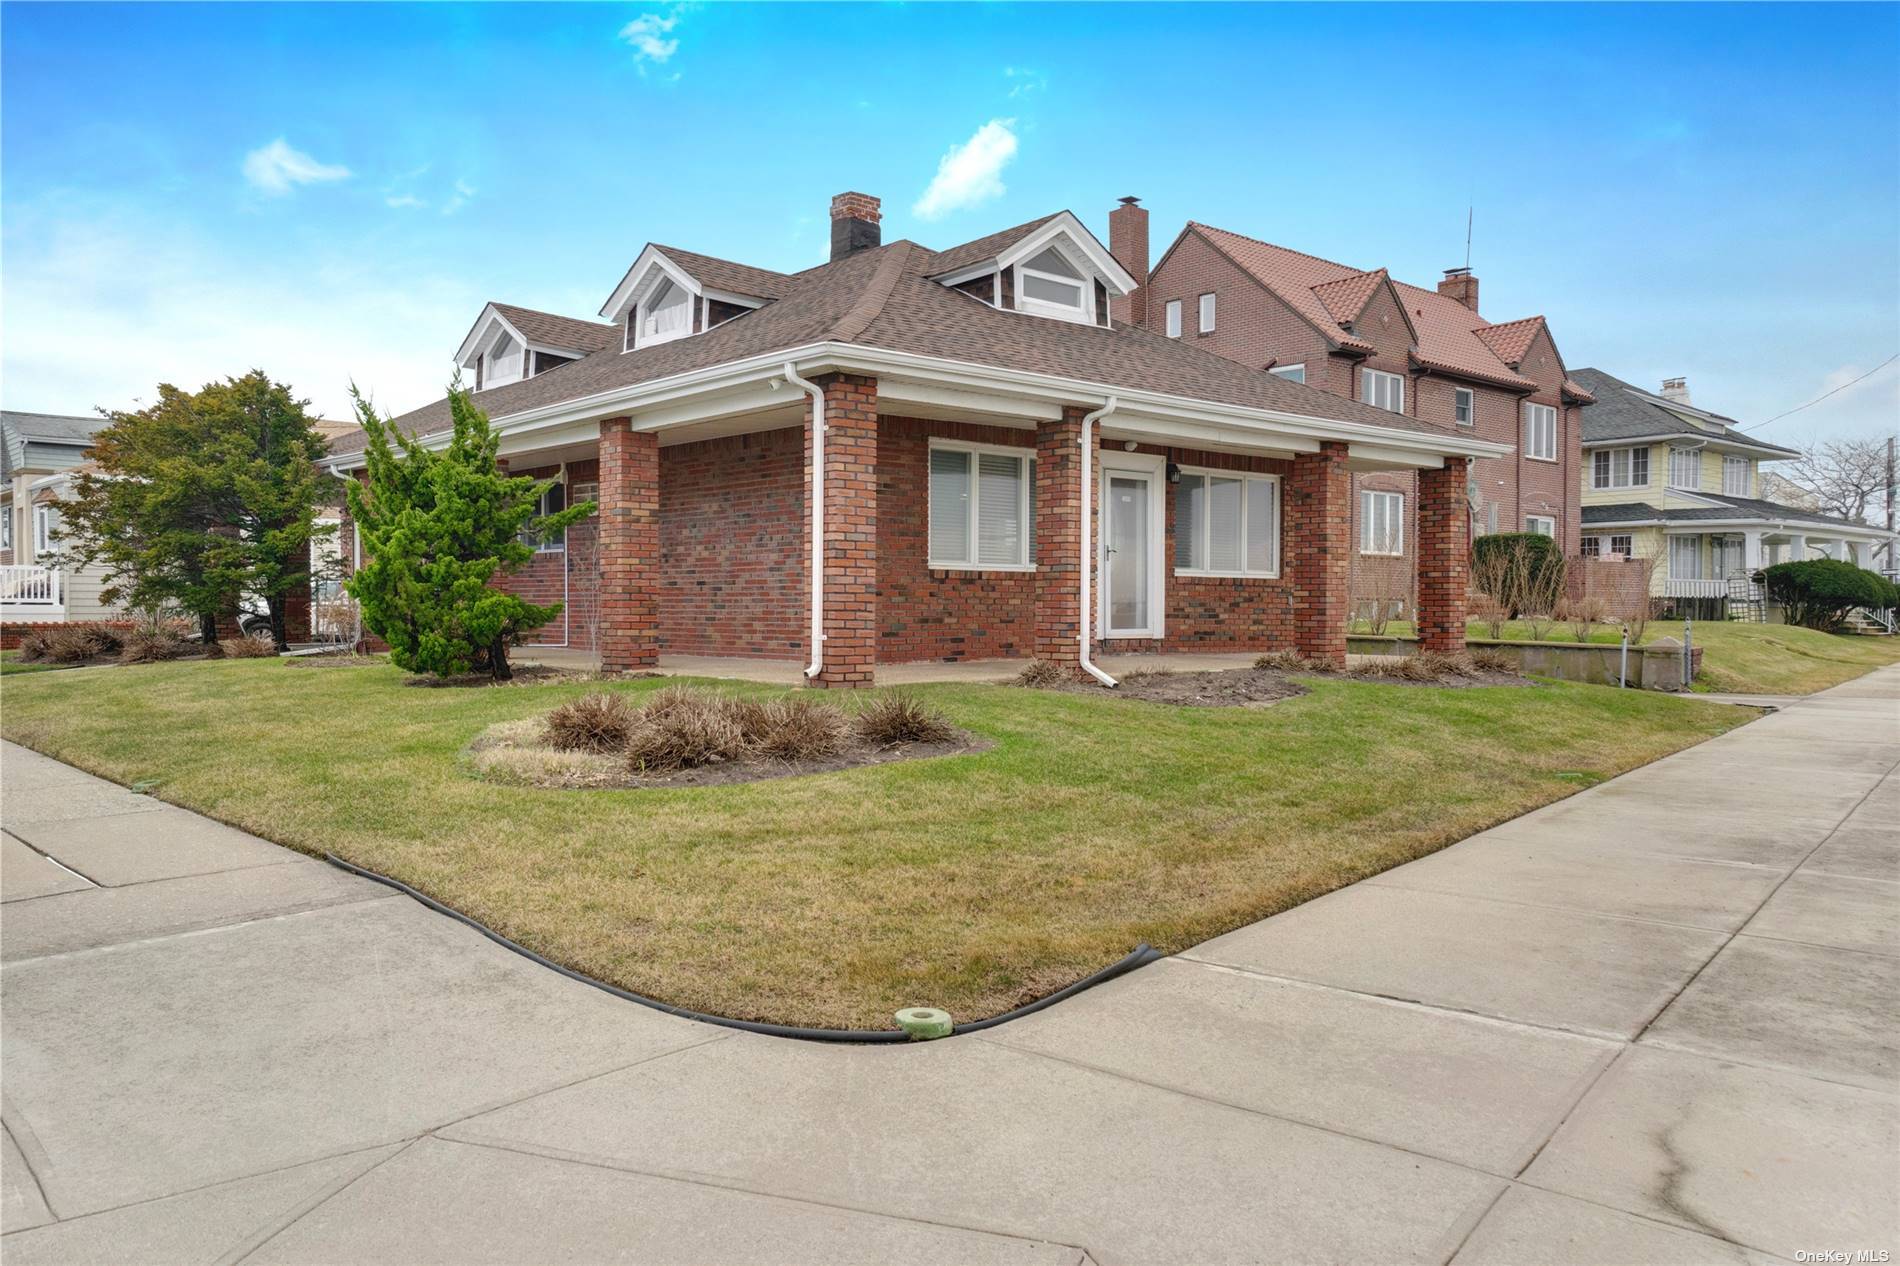 This stunning ALL BRICK ranch home is situated on a spacious 61.